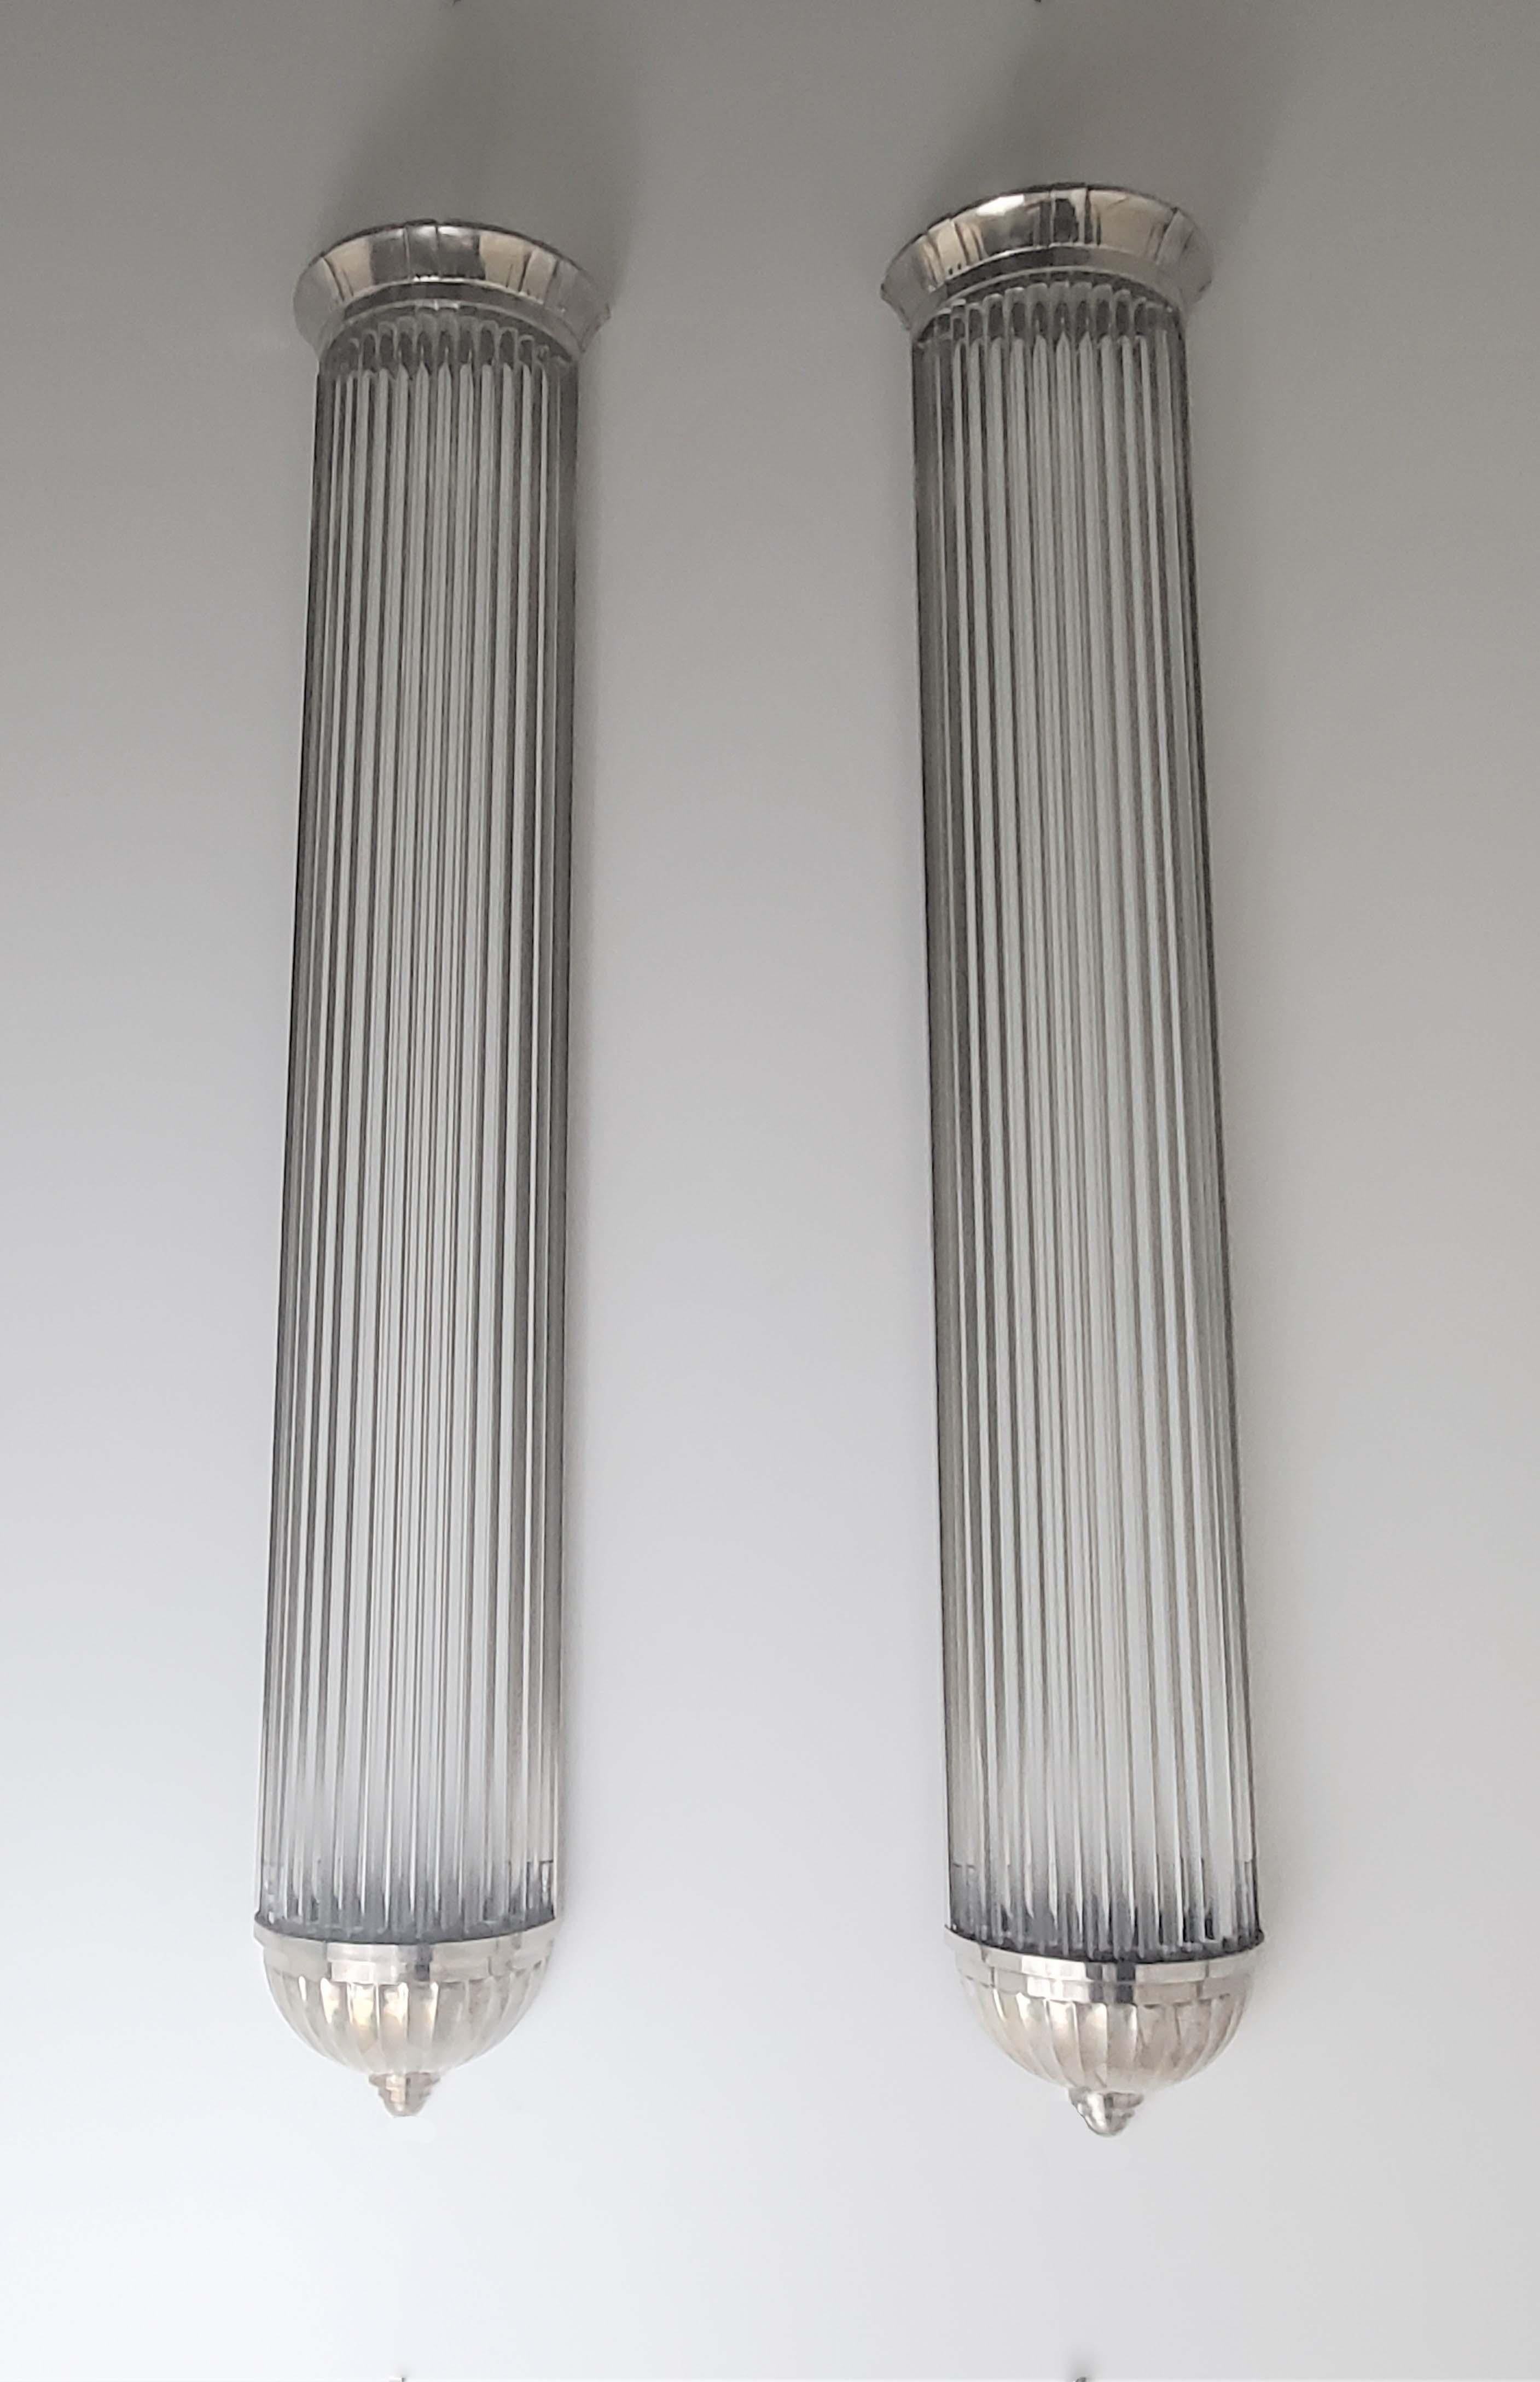 Monumental Pair of French Modernist Long Tubular Sconces by Petitot For Sale 7